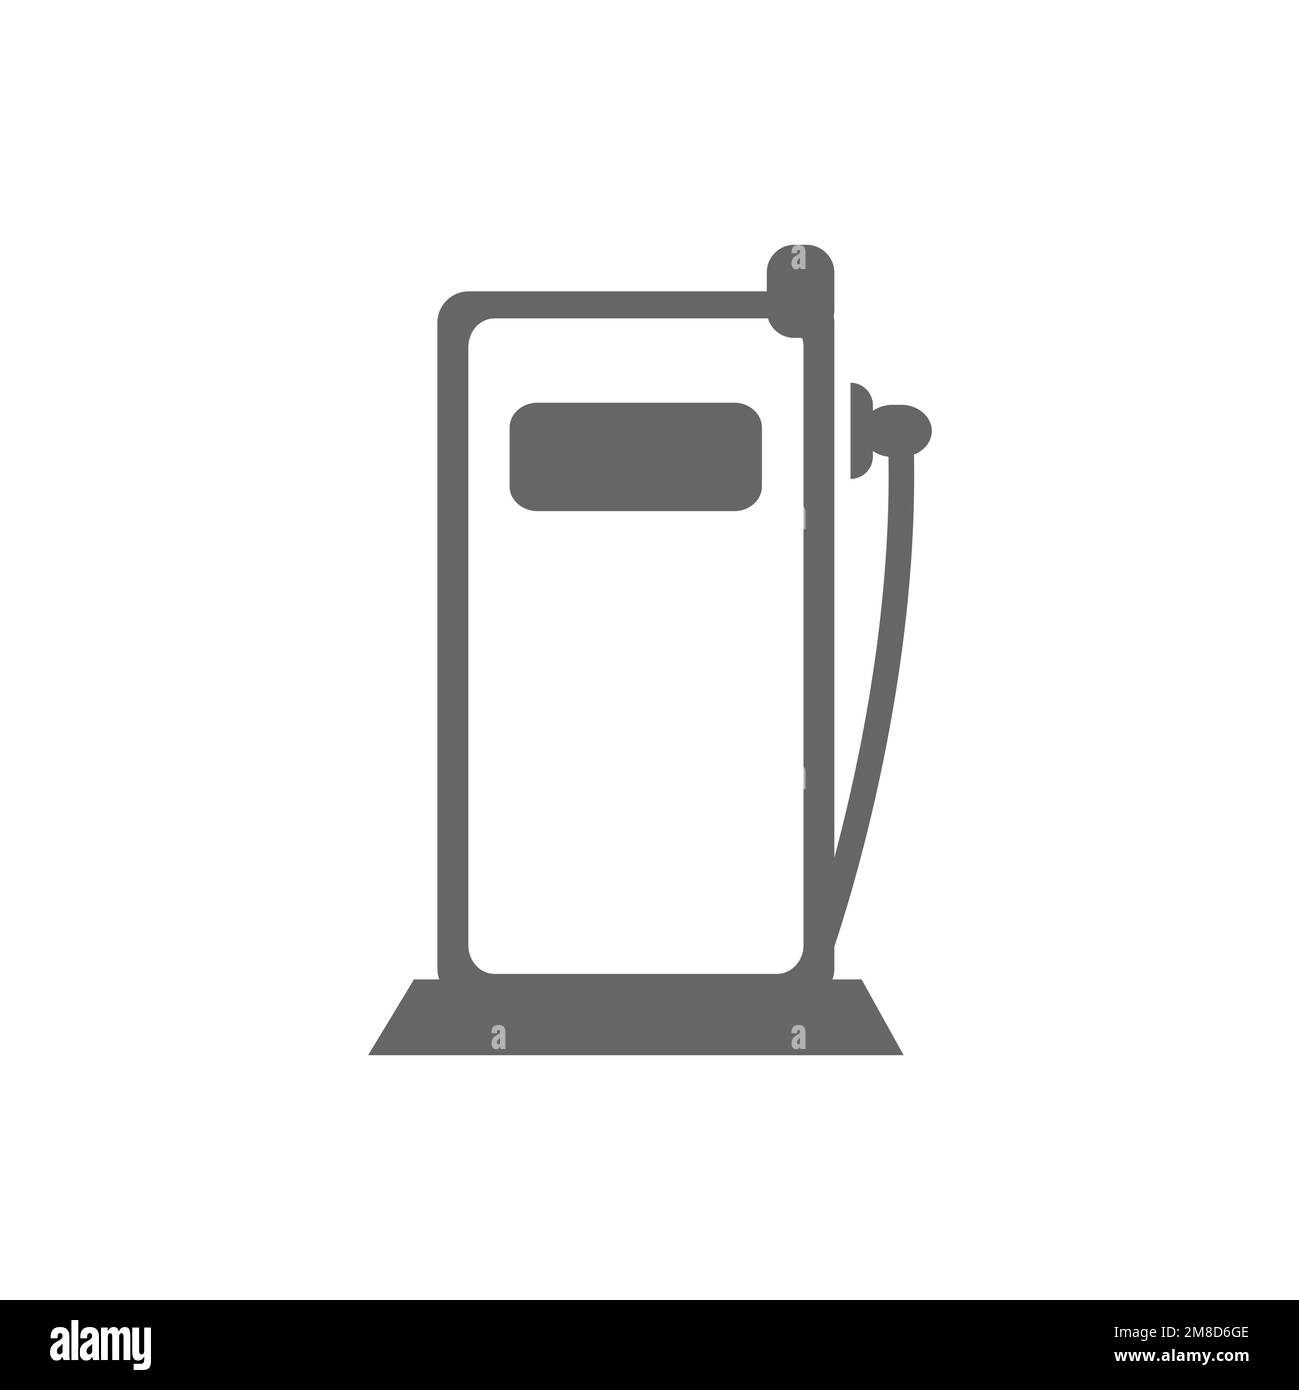 Charge point icon, common graphic resources, vector illustration. Stock Vector